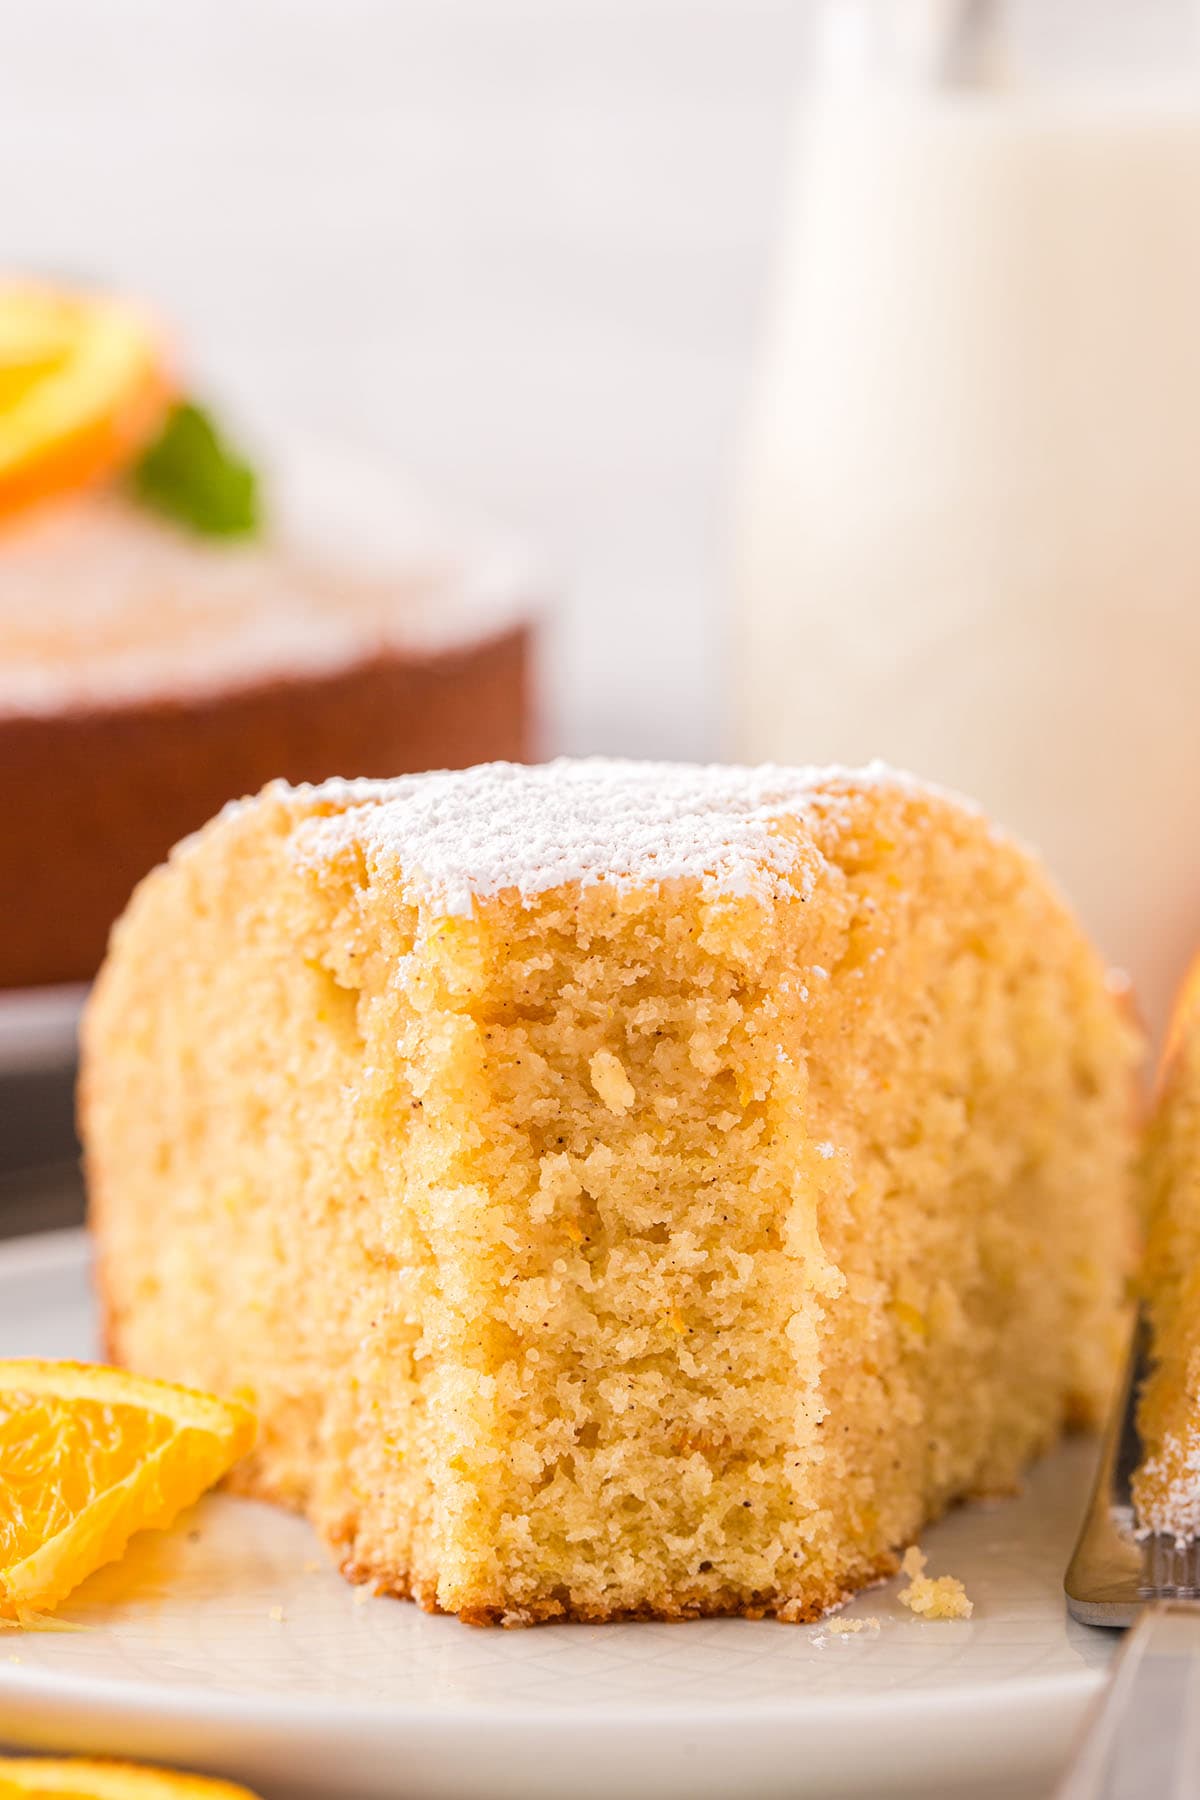 a slice of Orange Cake on a plate with orange slices on the side.